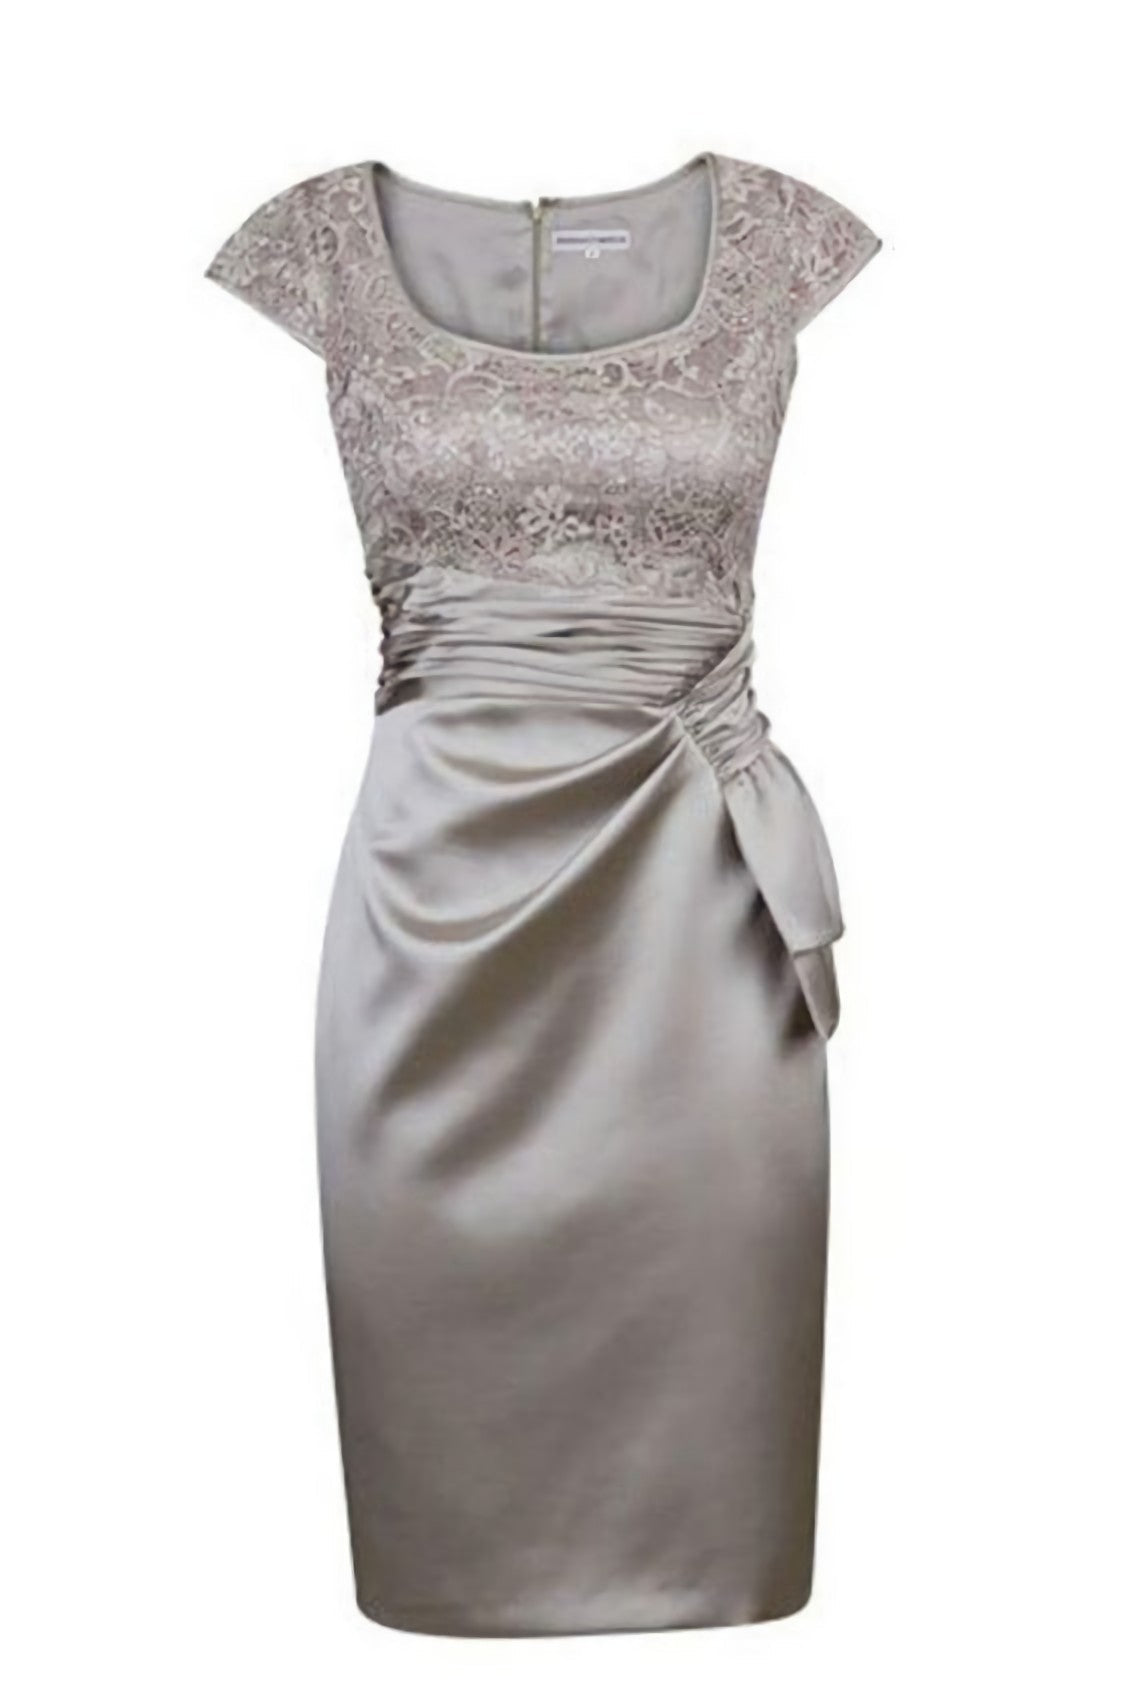 Elegant Short Silver Cap Sleeves Mother Of The Bride Dress, Corset Homecoming Dress outfit, Prom Dress Long Beautiful